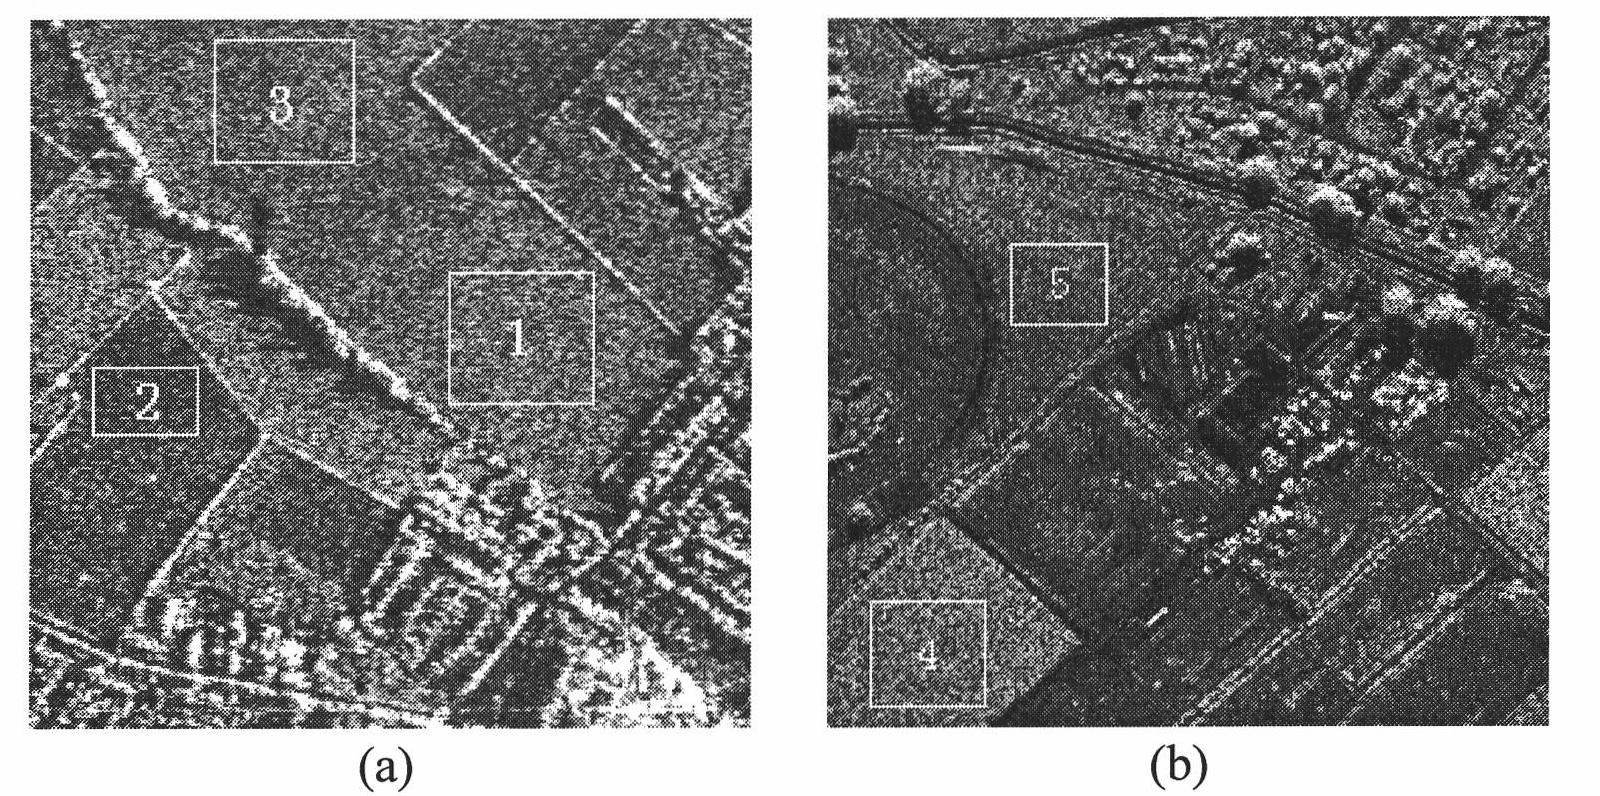 SAR image de-speckling method based on improved Bayes non-local mean filter